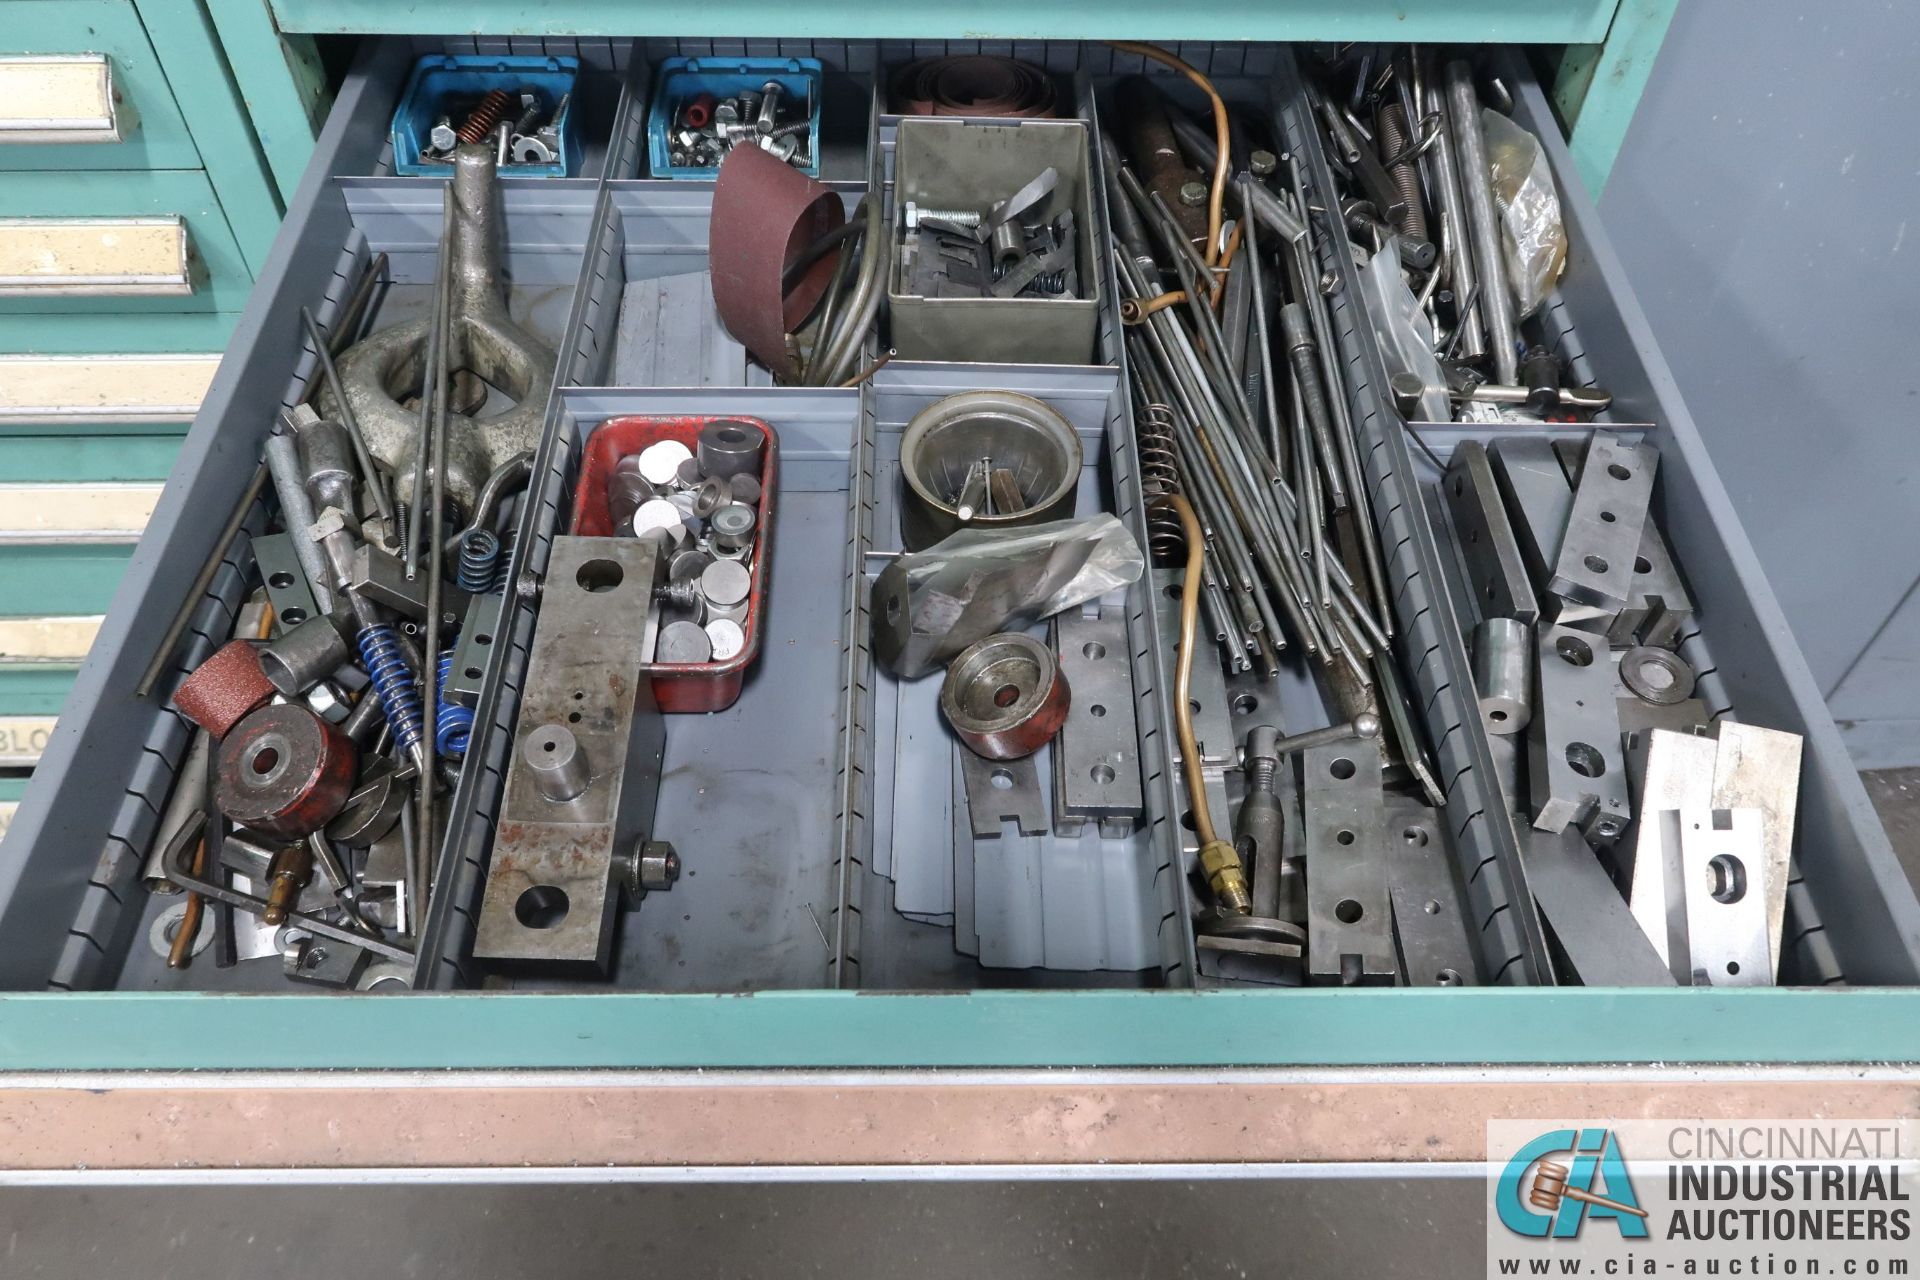 10-DRAWER LISTA-TYPE CABINET WITH SACMA TOOLING & PARTS - Loading fee due the "ERRA" Pedowitz - Image 5 of 8